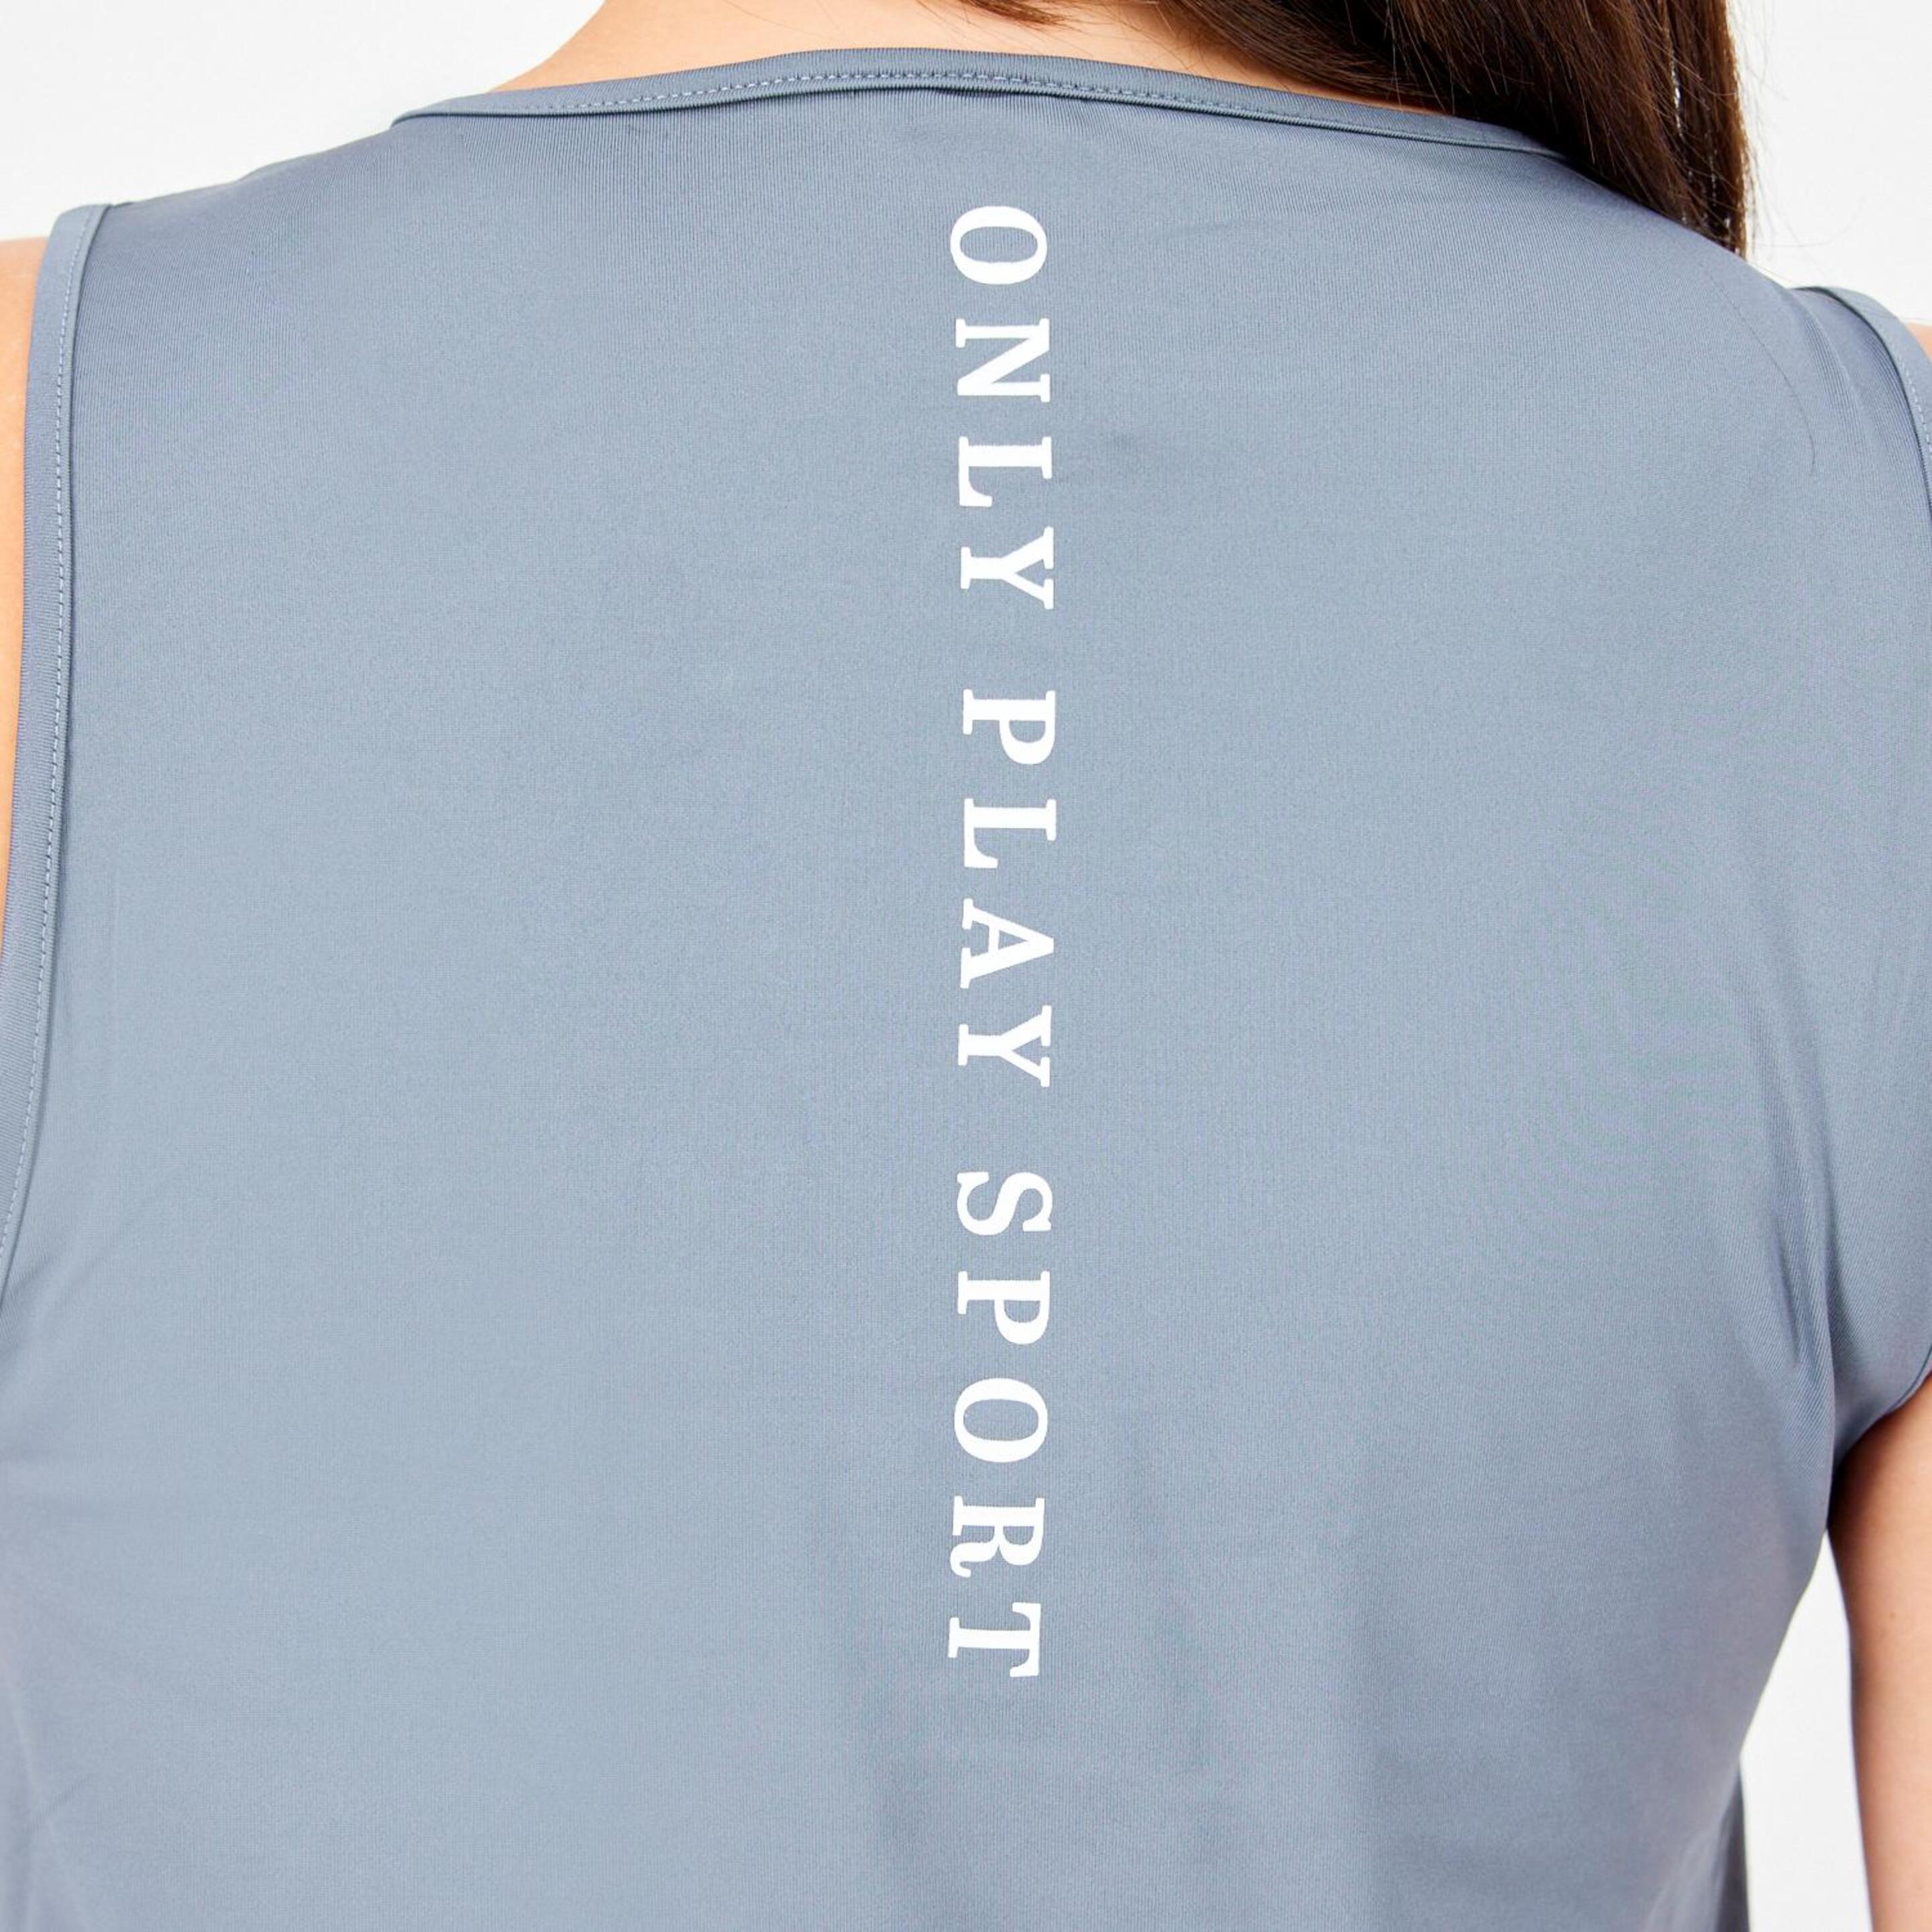 Only Play Sweet - Denim - Camiseta Fitness Mujer